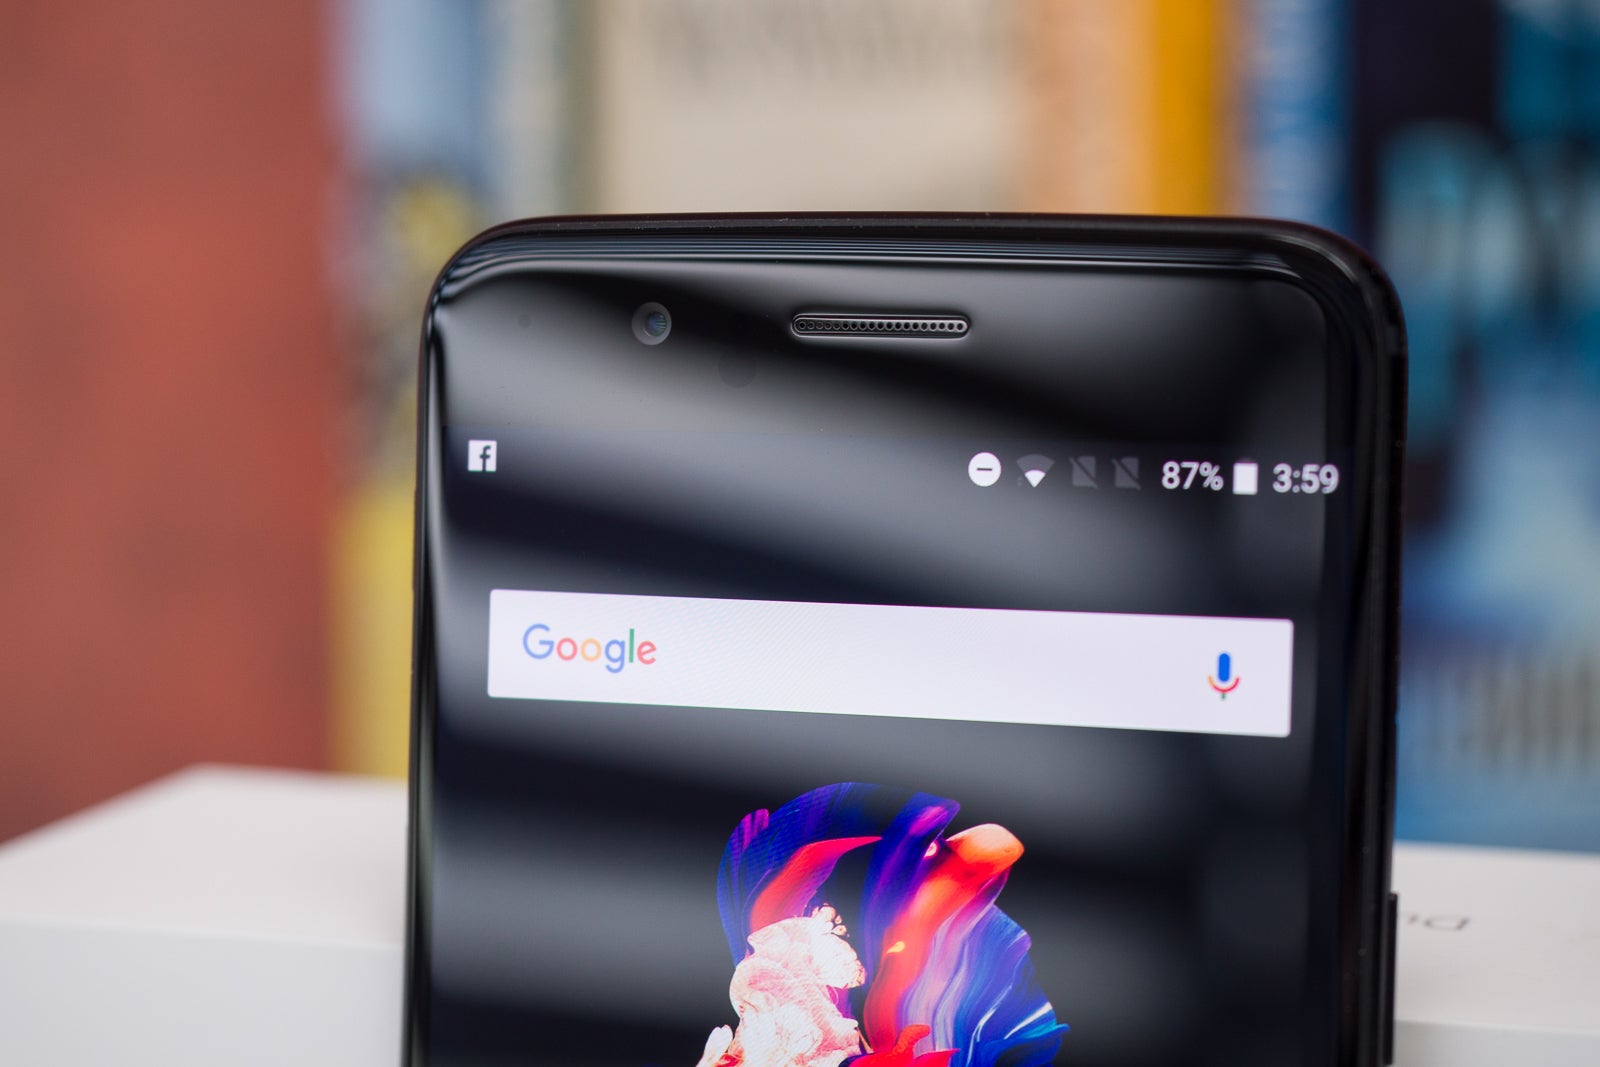 OnePlus releases OnePlus 5 Oreo Beta 2, here are all the new changes